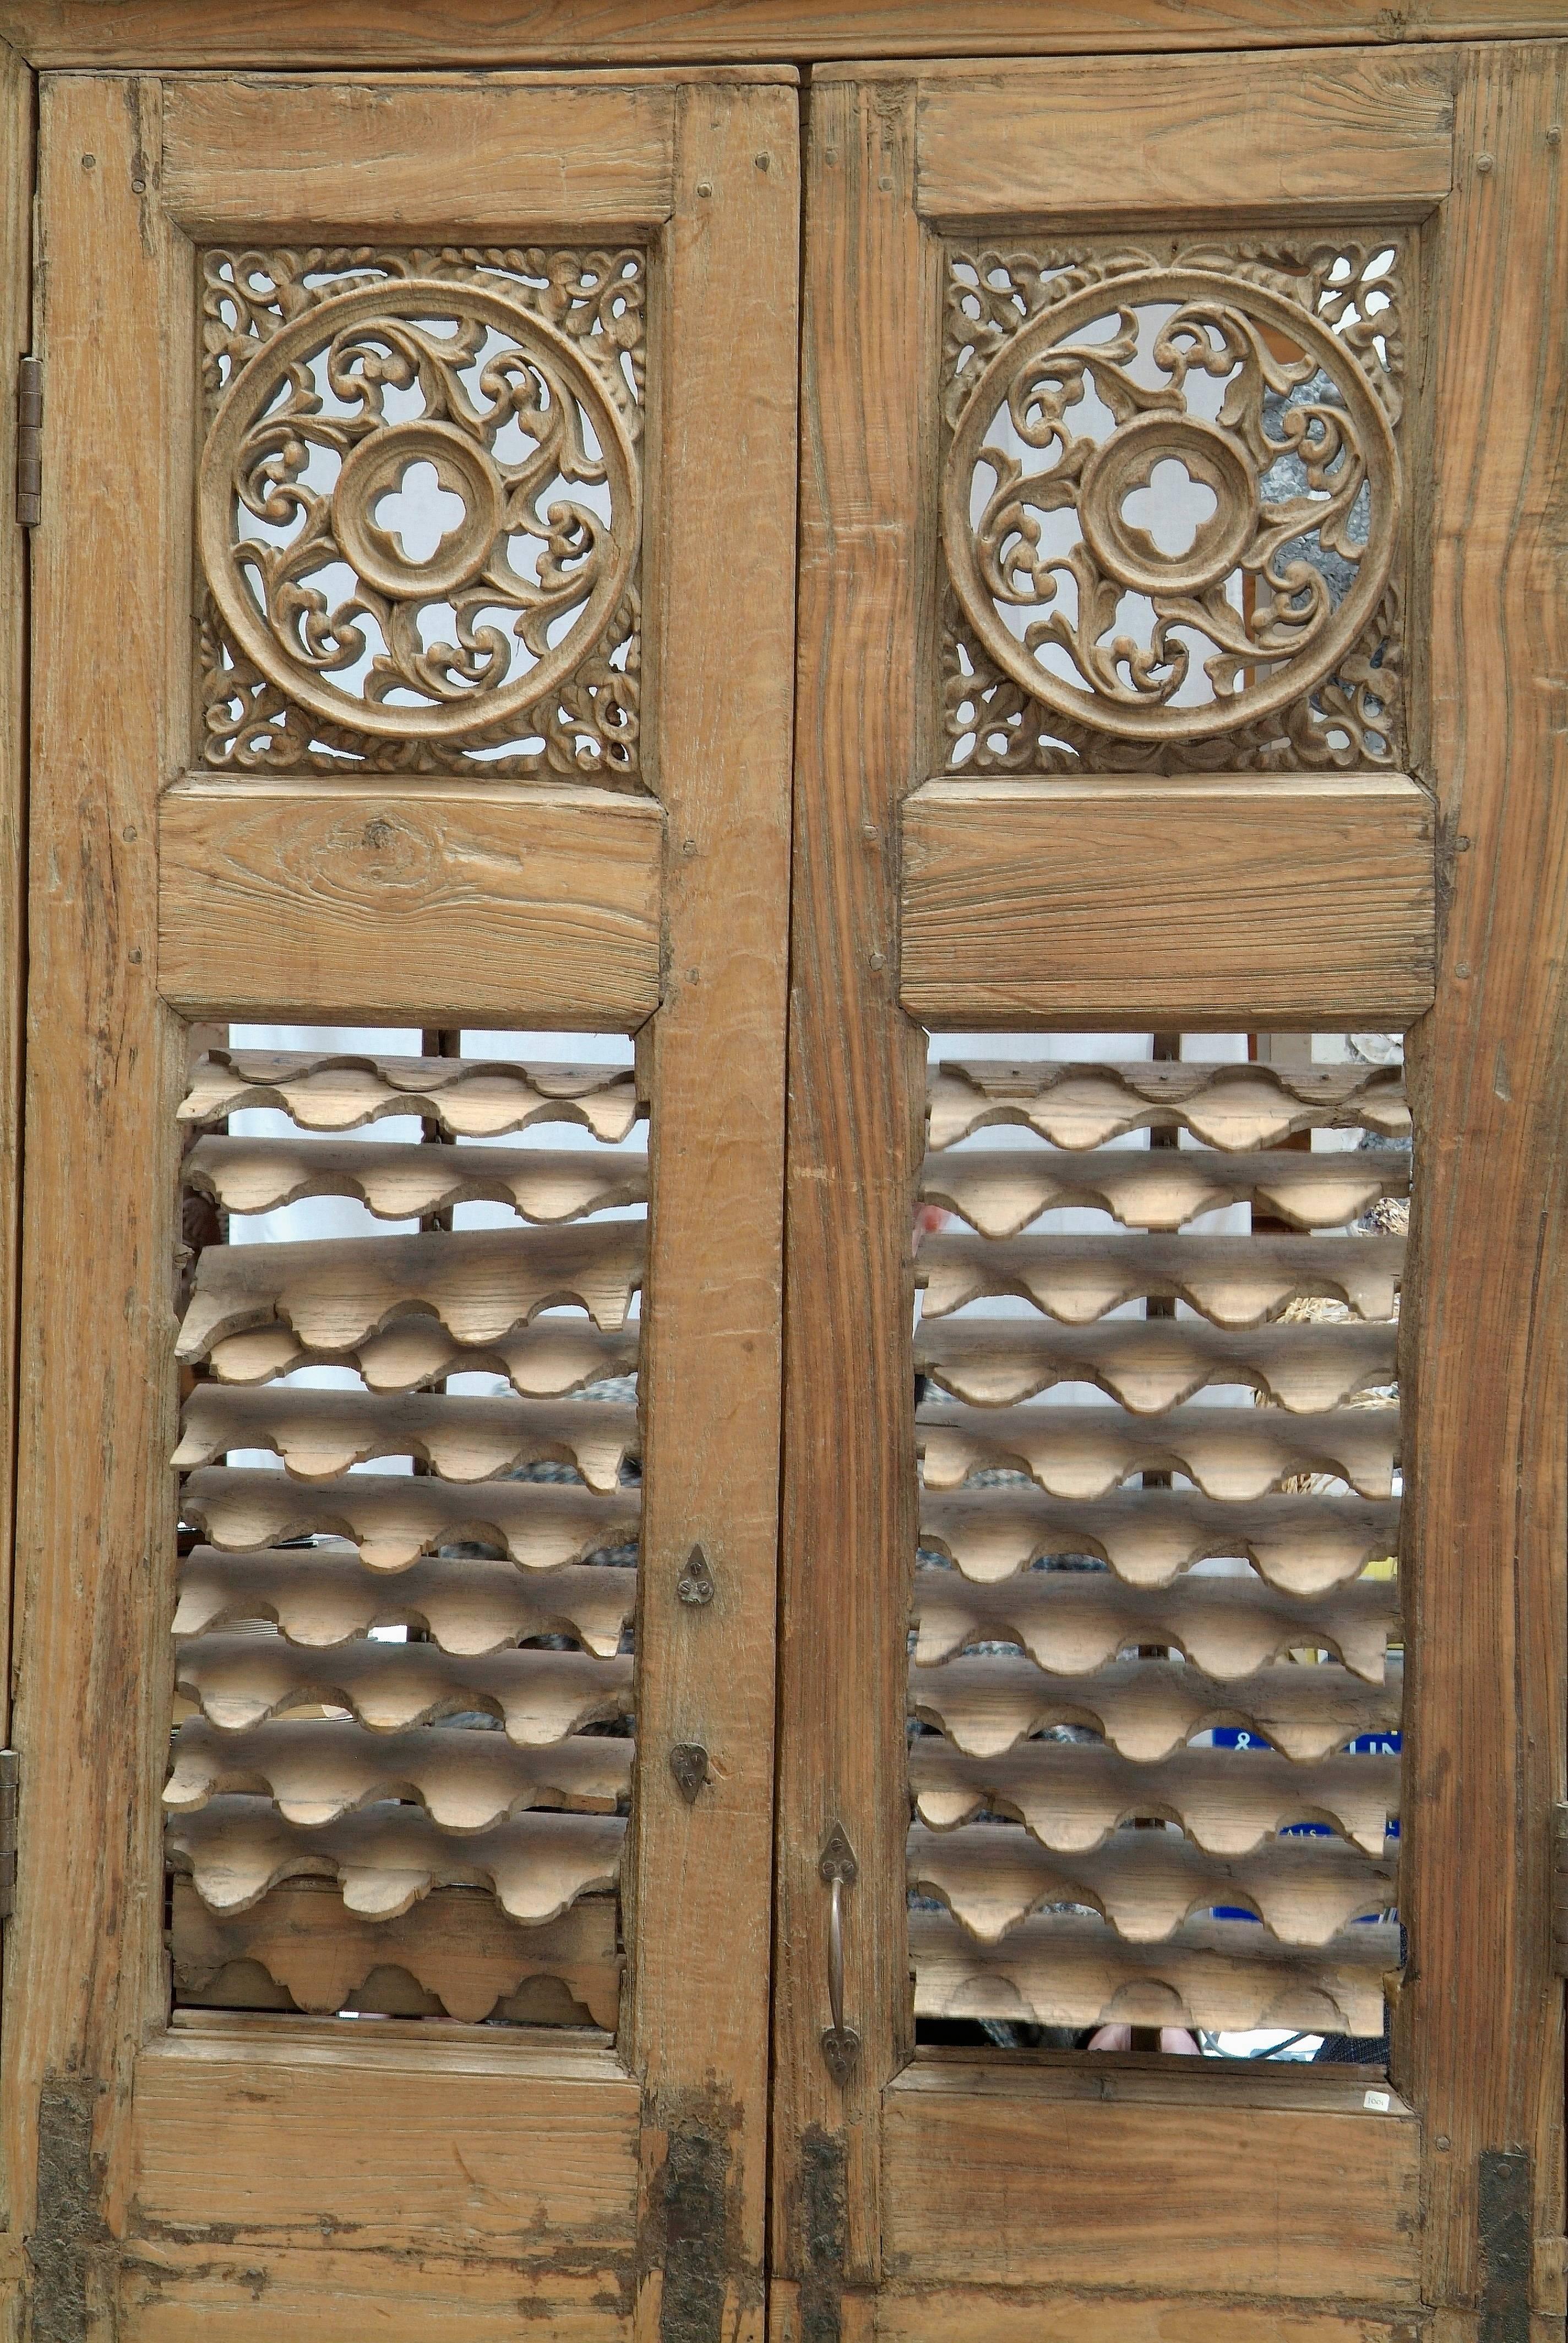 Hudge Indo-Portuguese door natural teakwood delicately carved -opening system with rare shutters, India, 18th century.
Dimensions: W 102 X H 272 X D 14 cm.